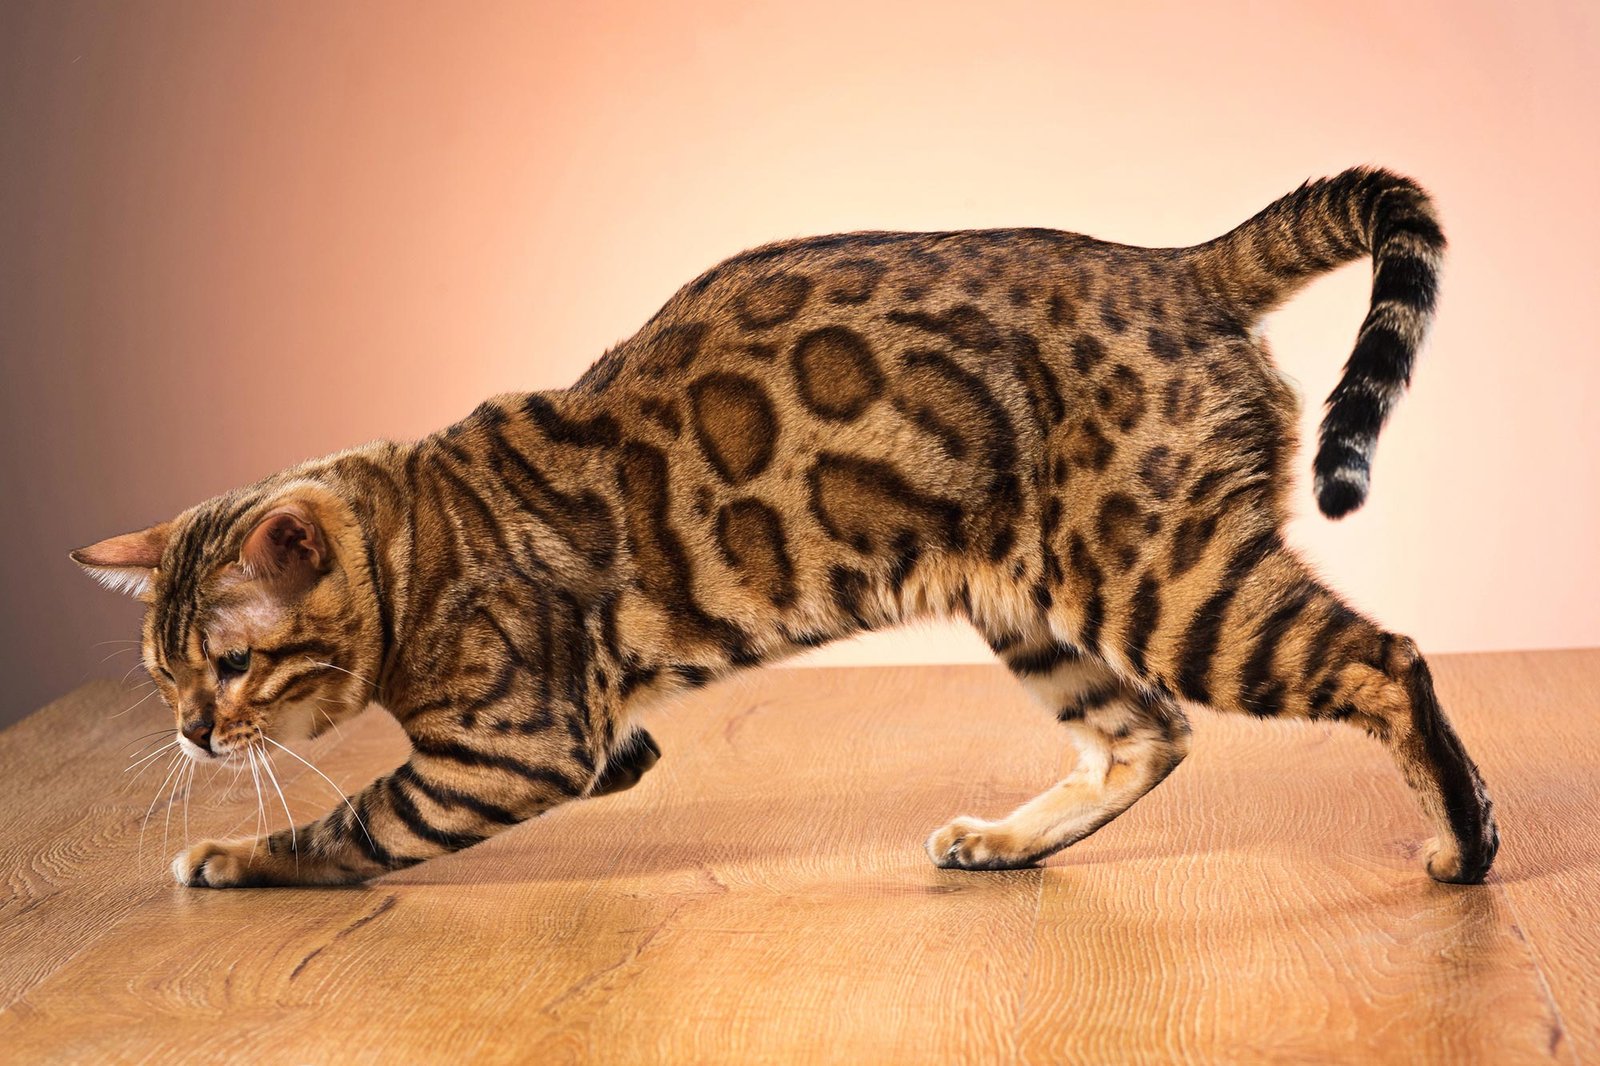 Bengal Cats’ Wild Appearance From Domestic DNA